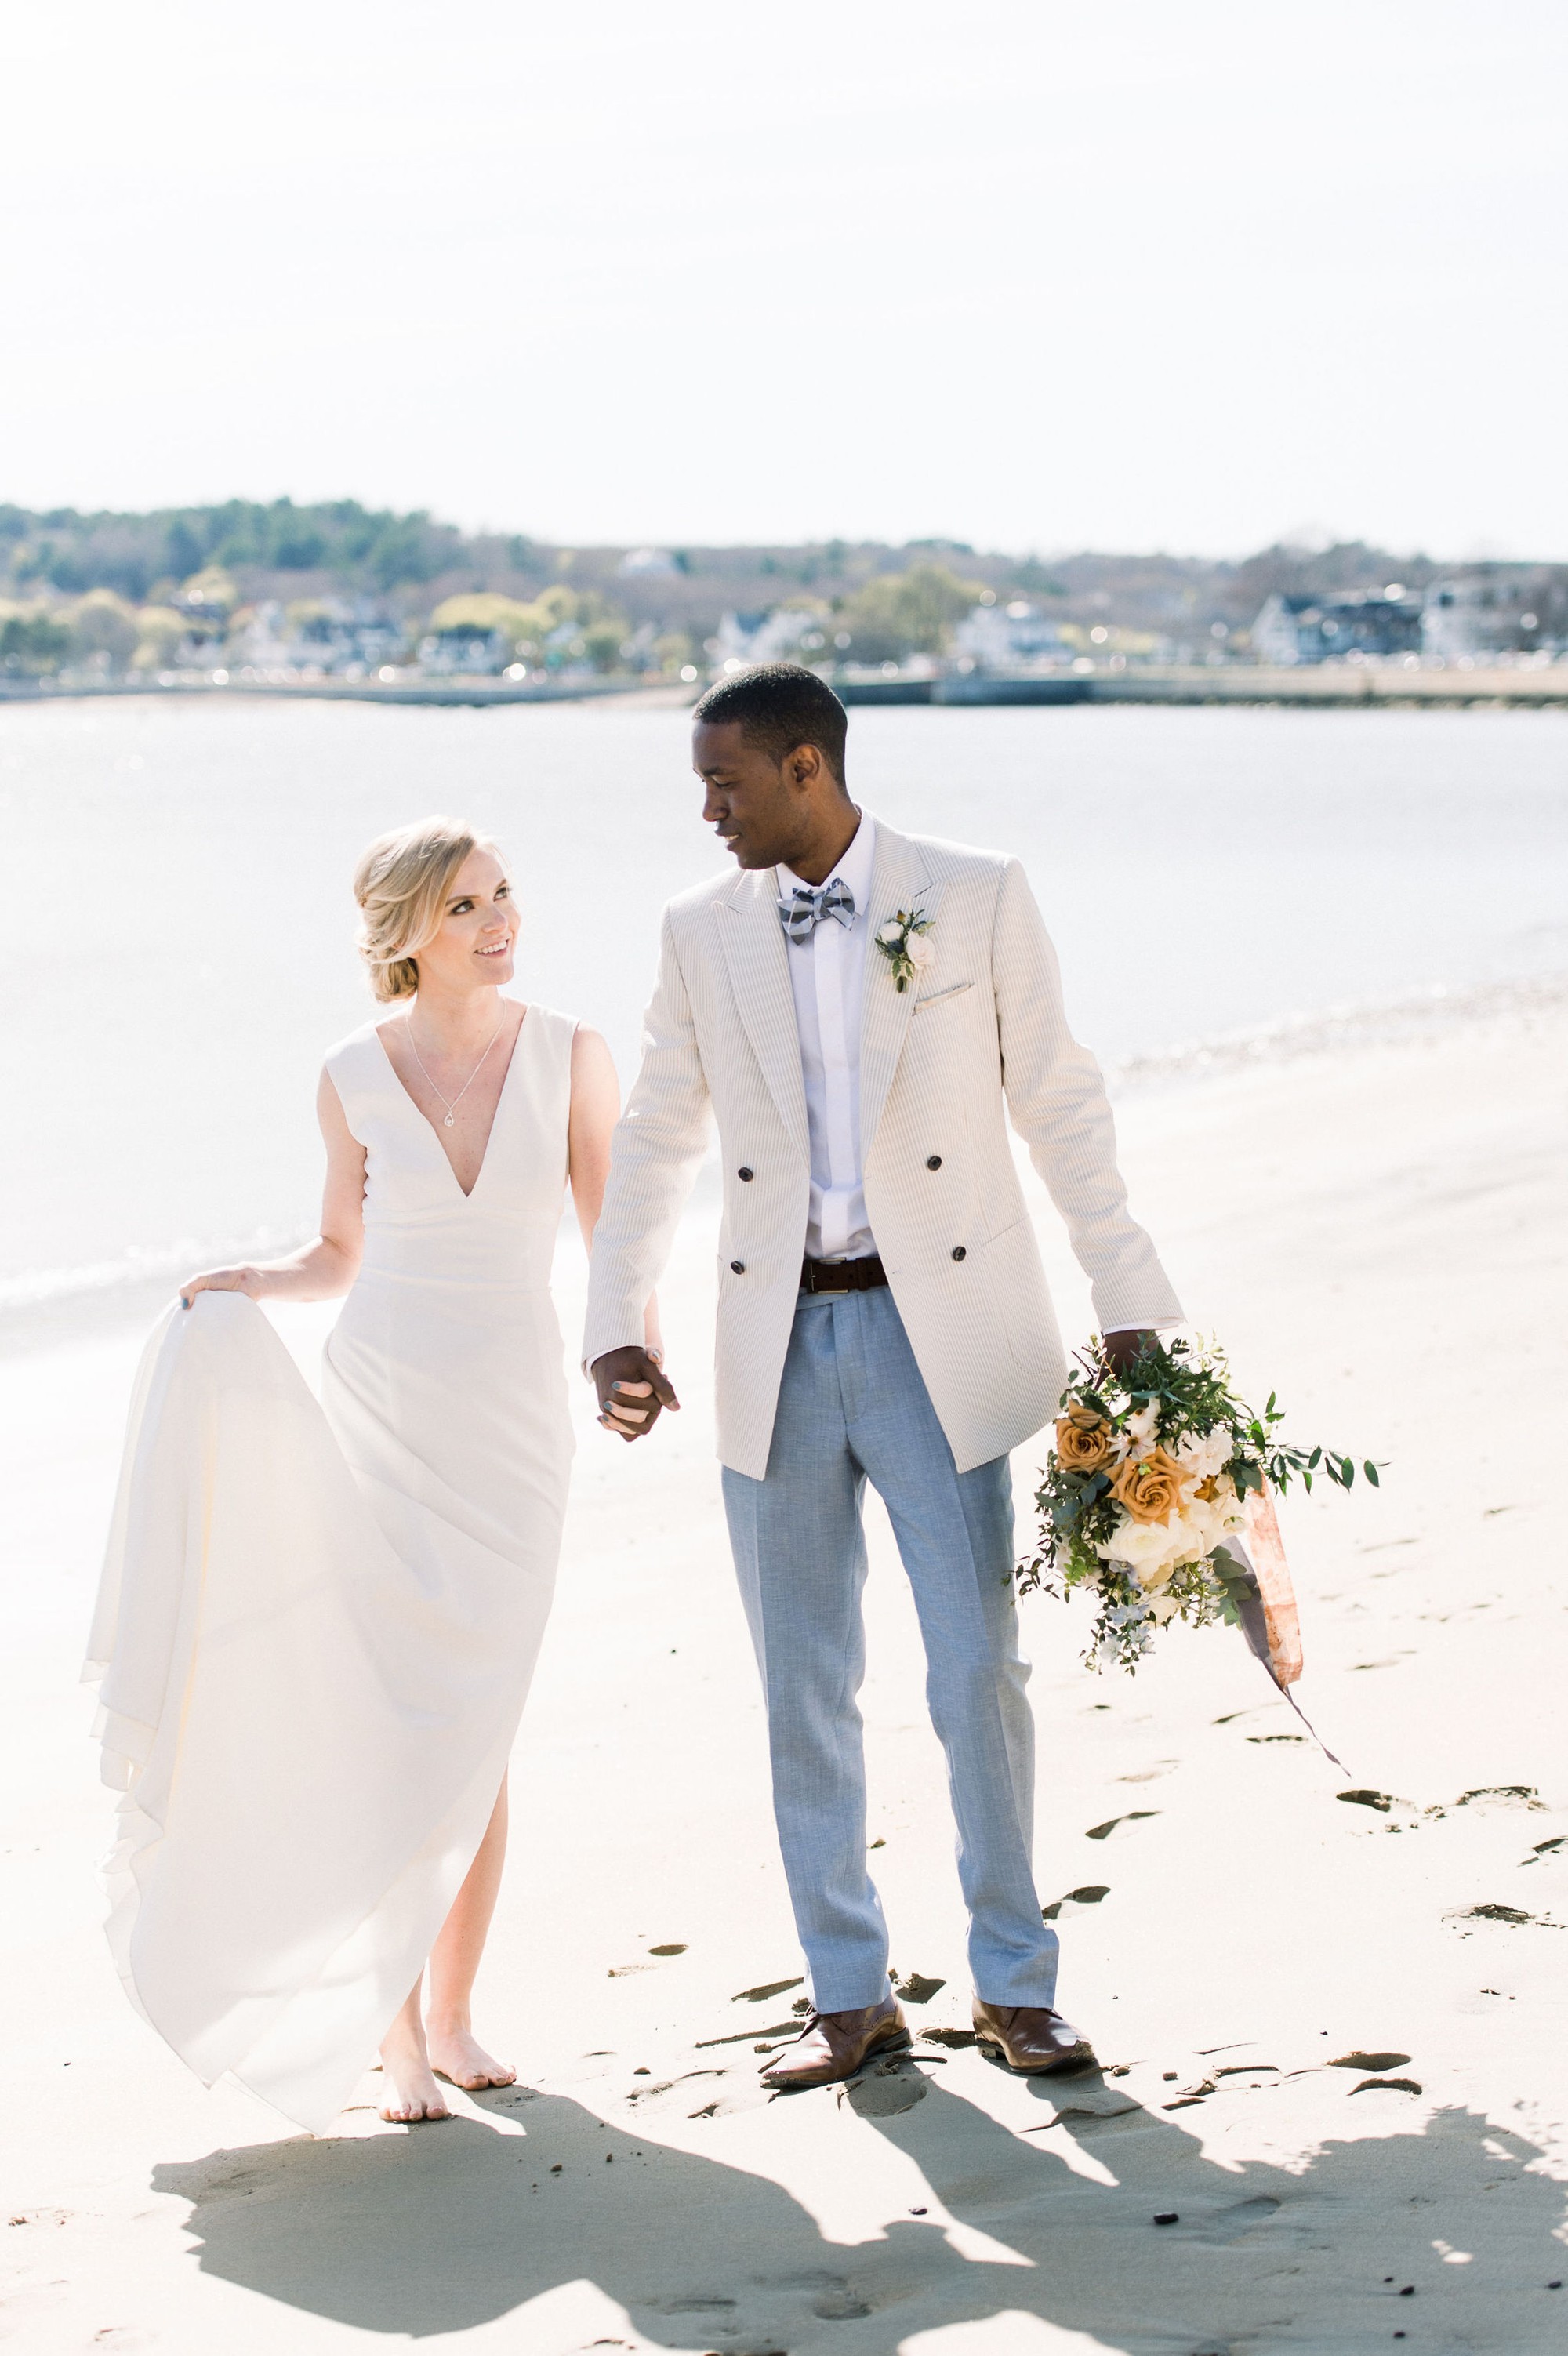 Gloucester MA Beauport Hotel Wedding | Tuscan meets modern | bride and groom couples portraits on beach for light and airy wedding photos